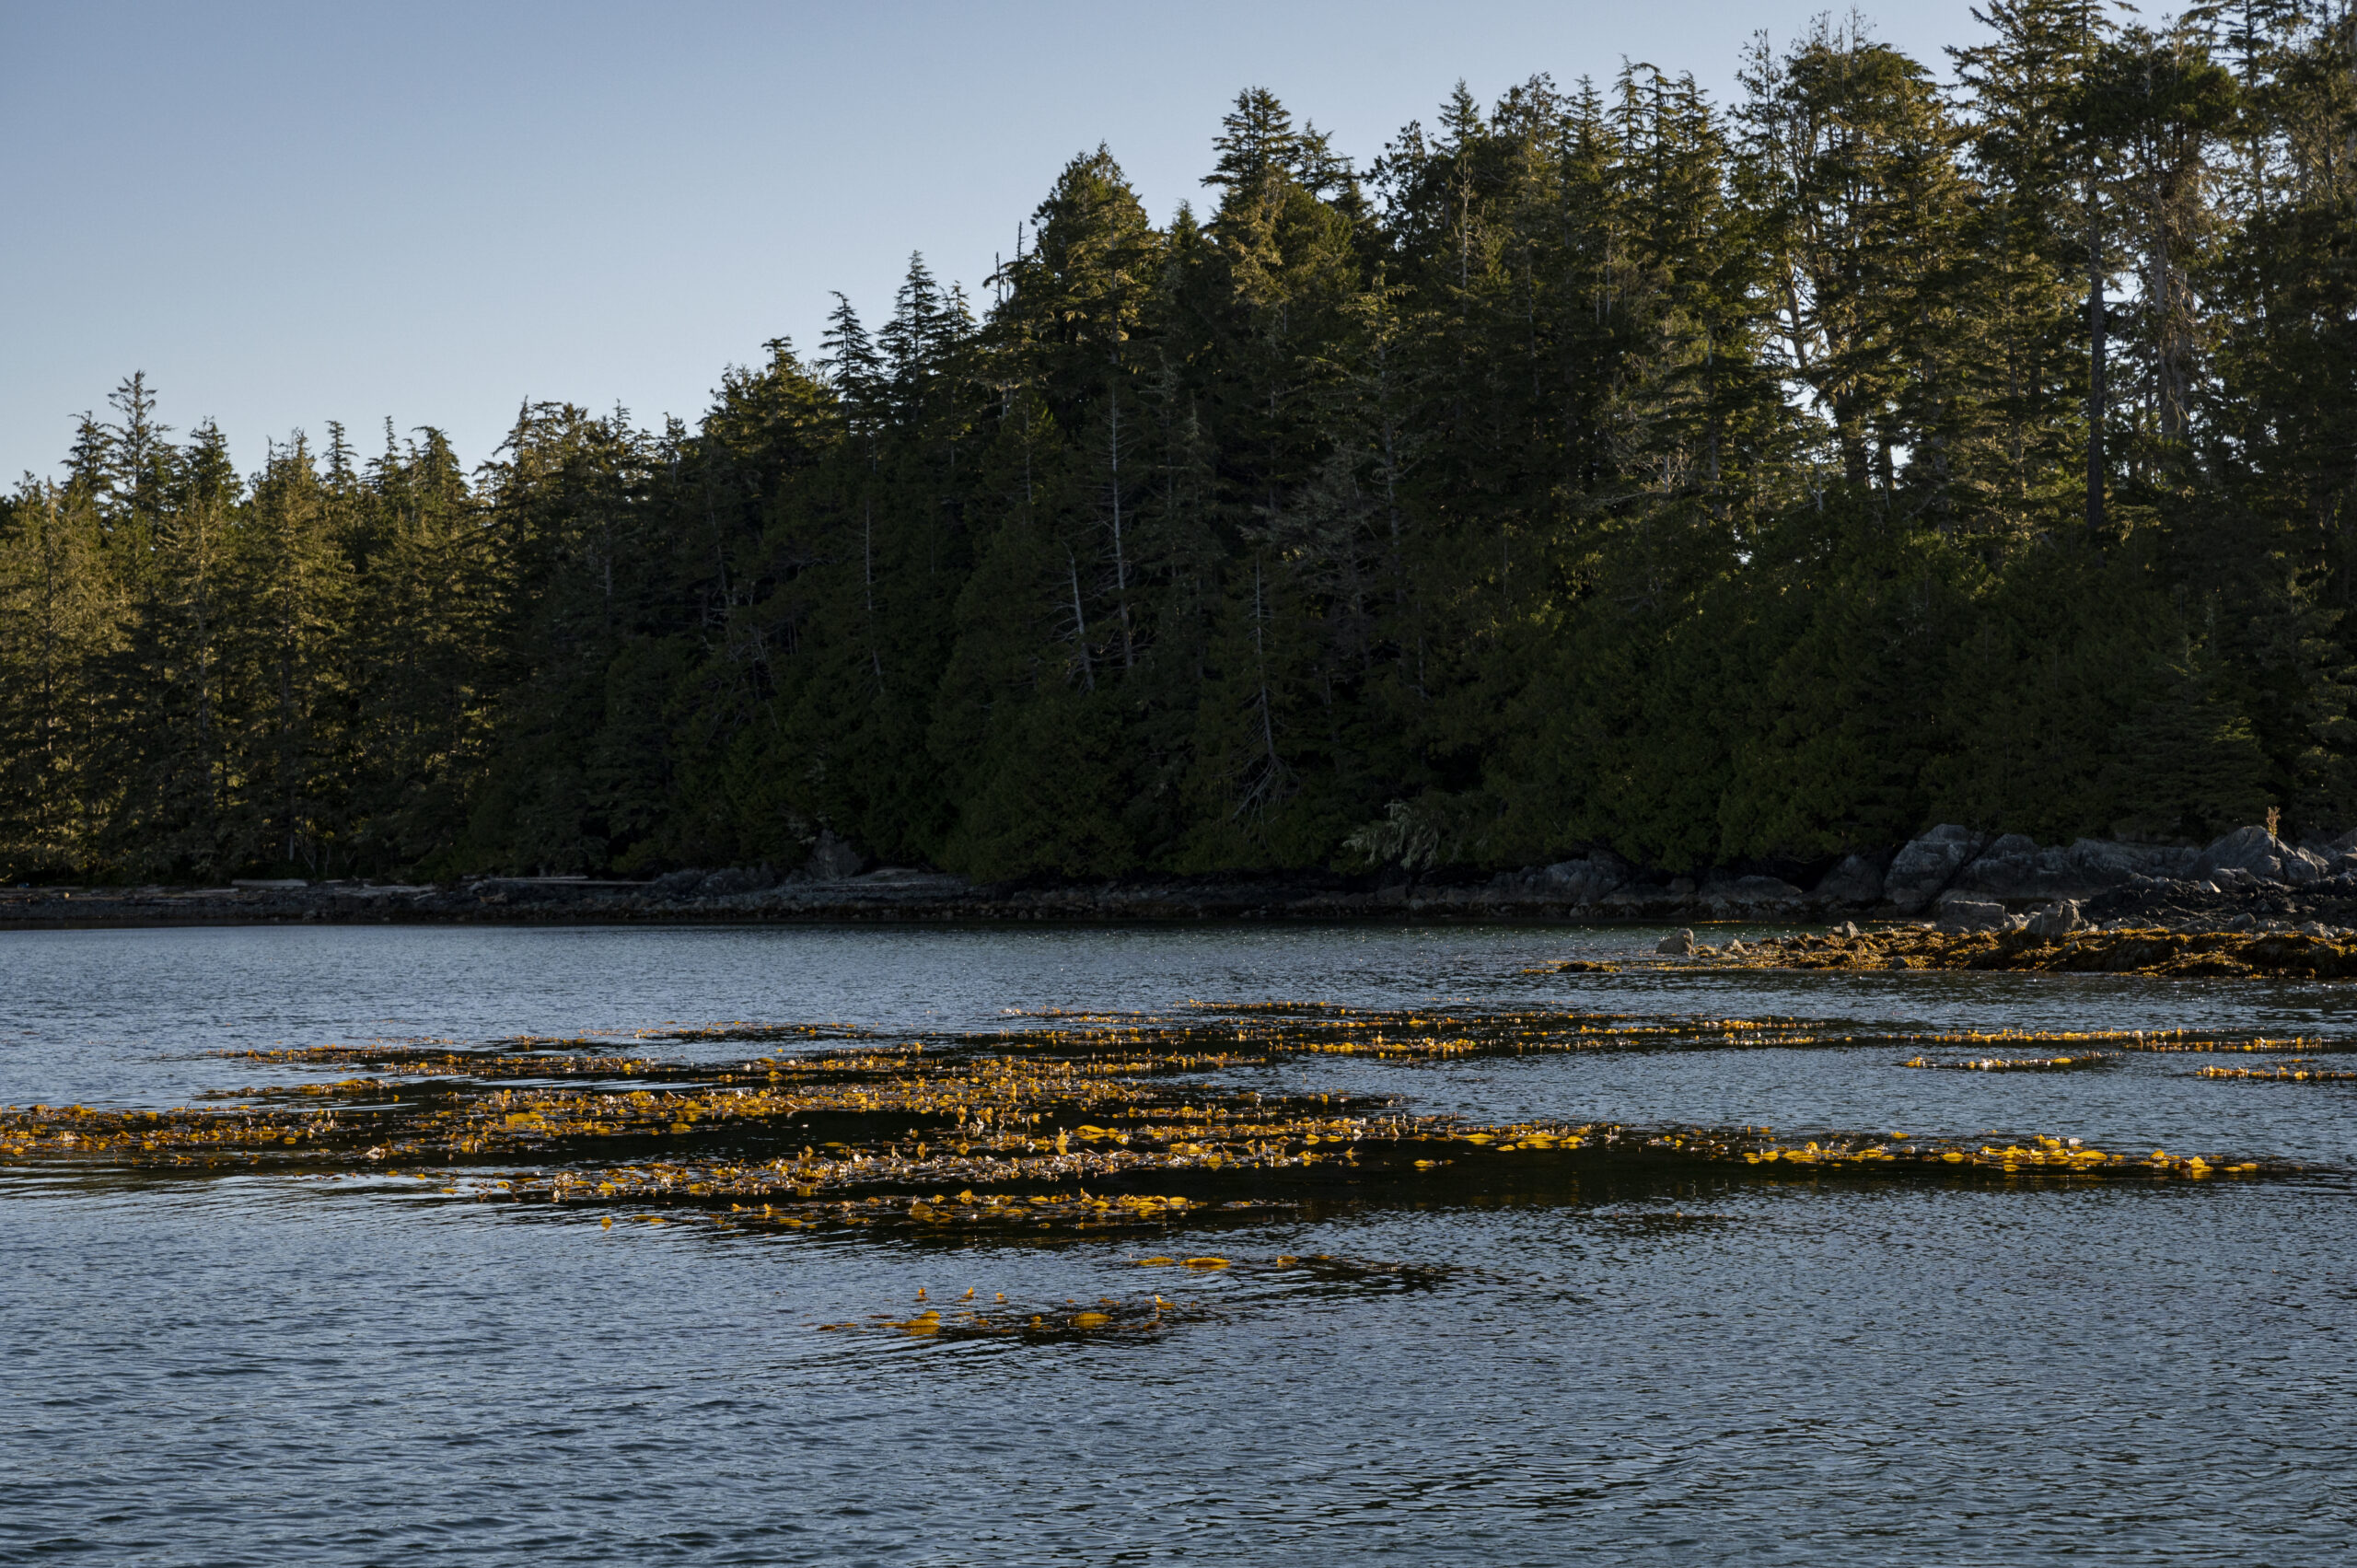 A landscape photo of a kelp forest, with just the tips of the kelp forests visible at the surface. Trees in the background.